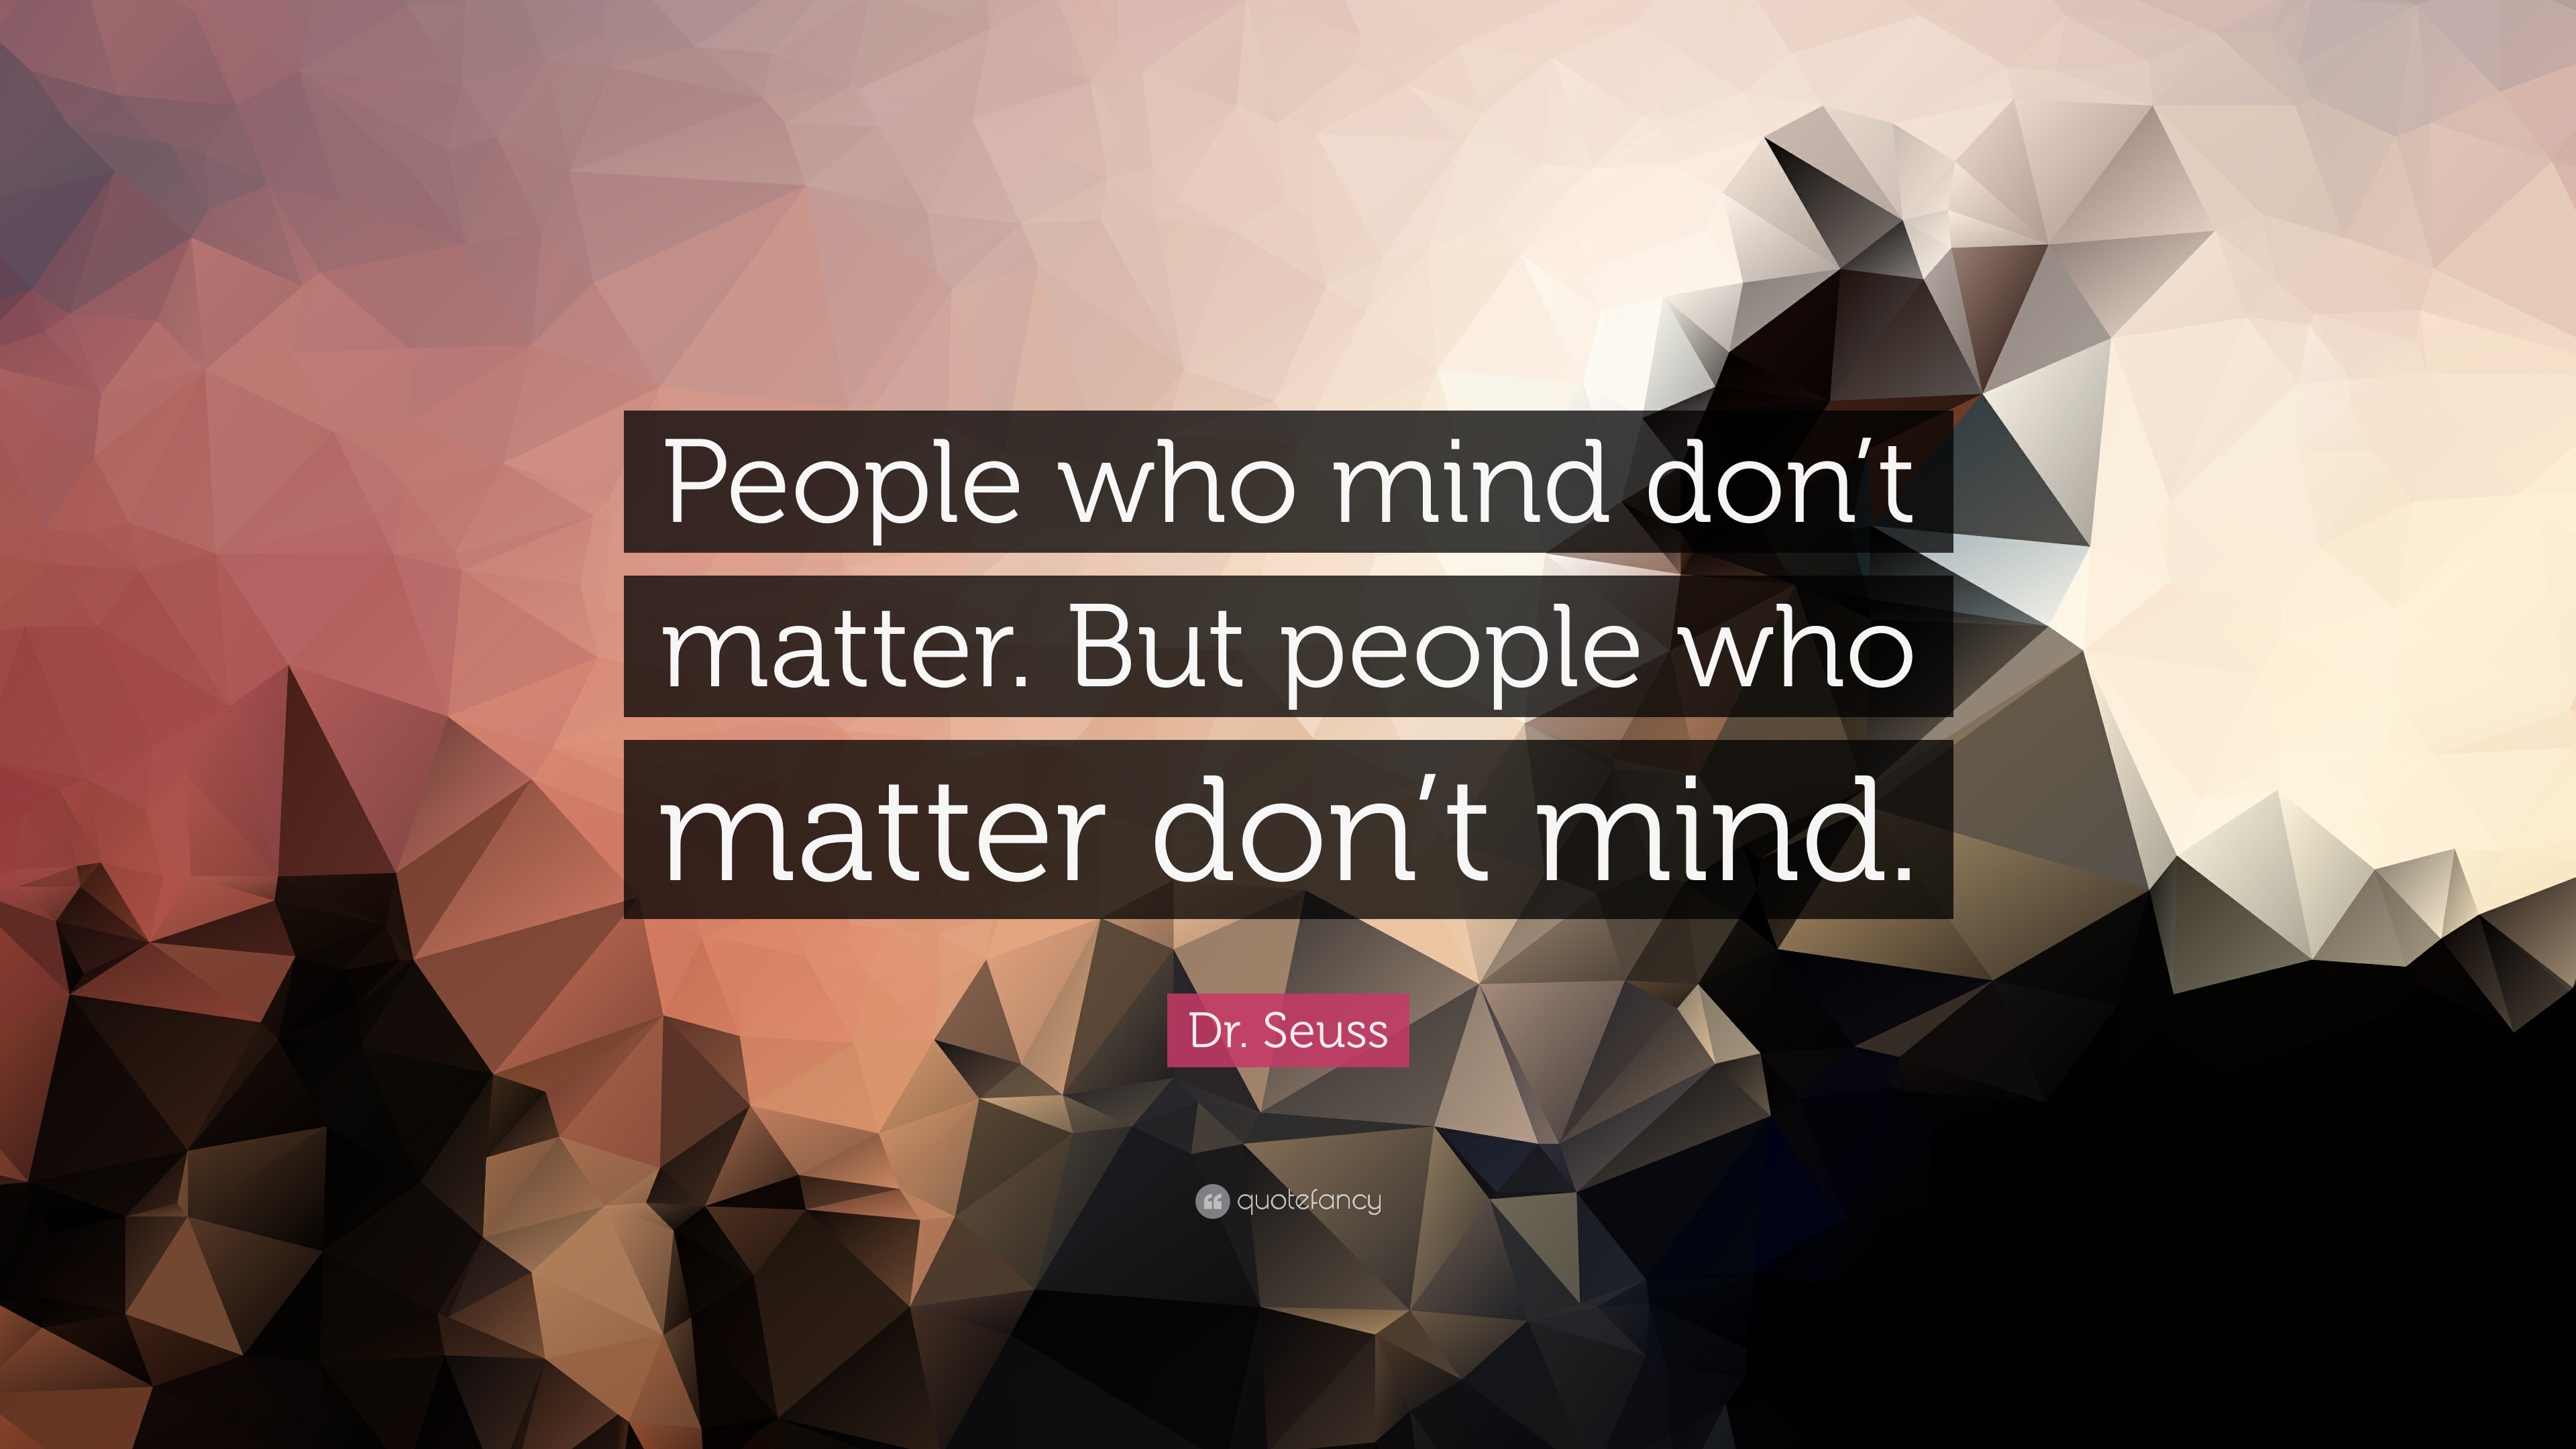 Dr. Seuss Quote: “People who mind don’t matter. But people who matter